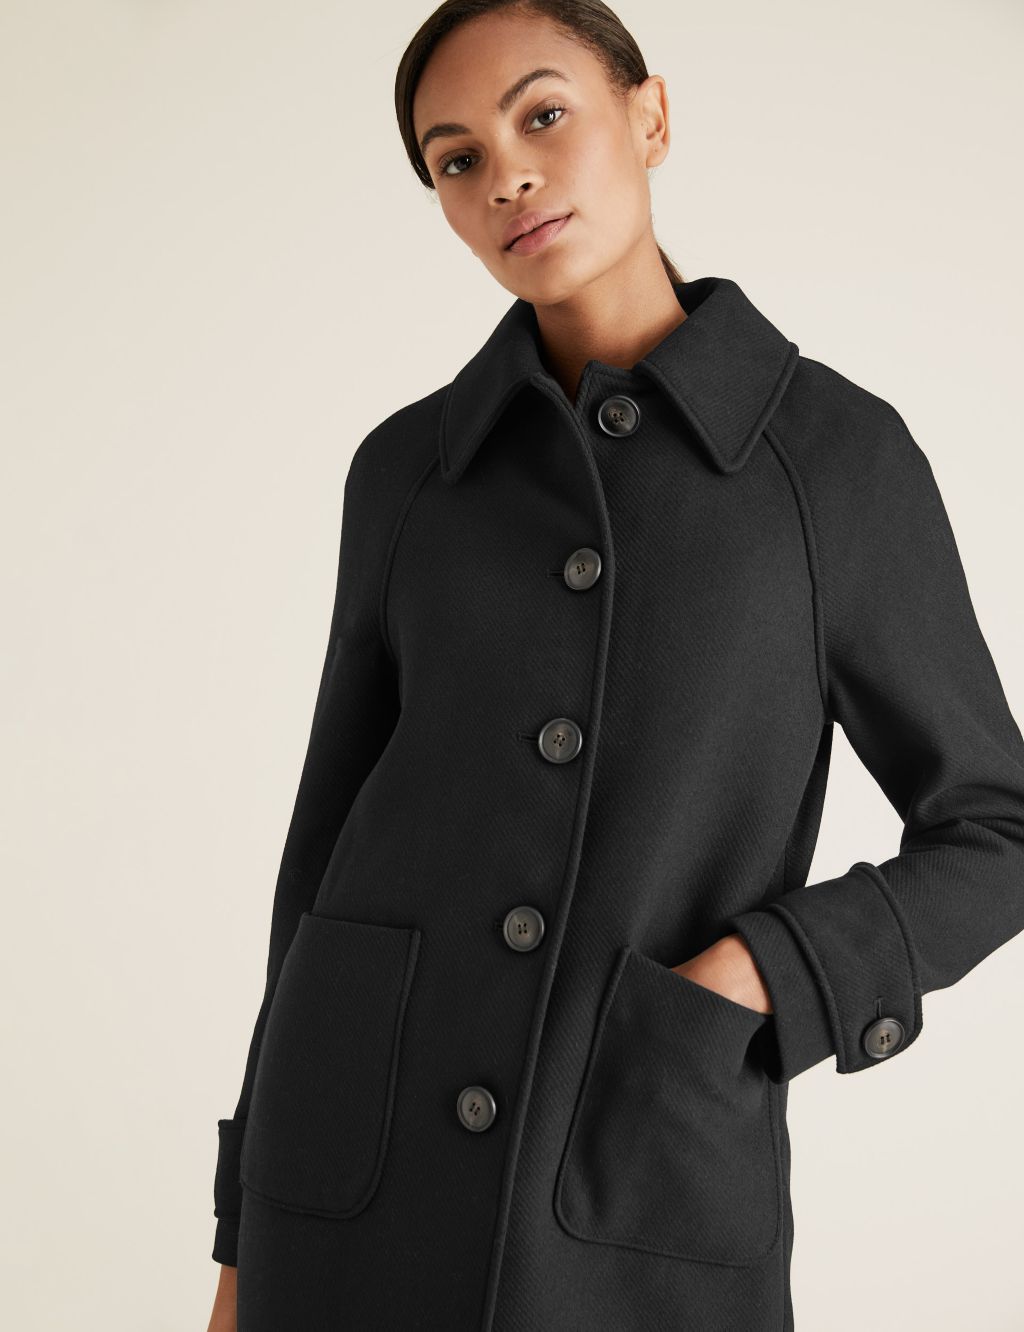 Buy Car Coat with Wool | M&S Collection | M&S